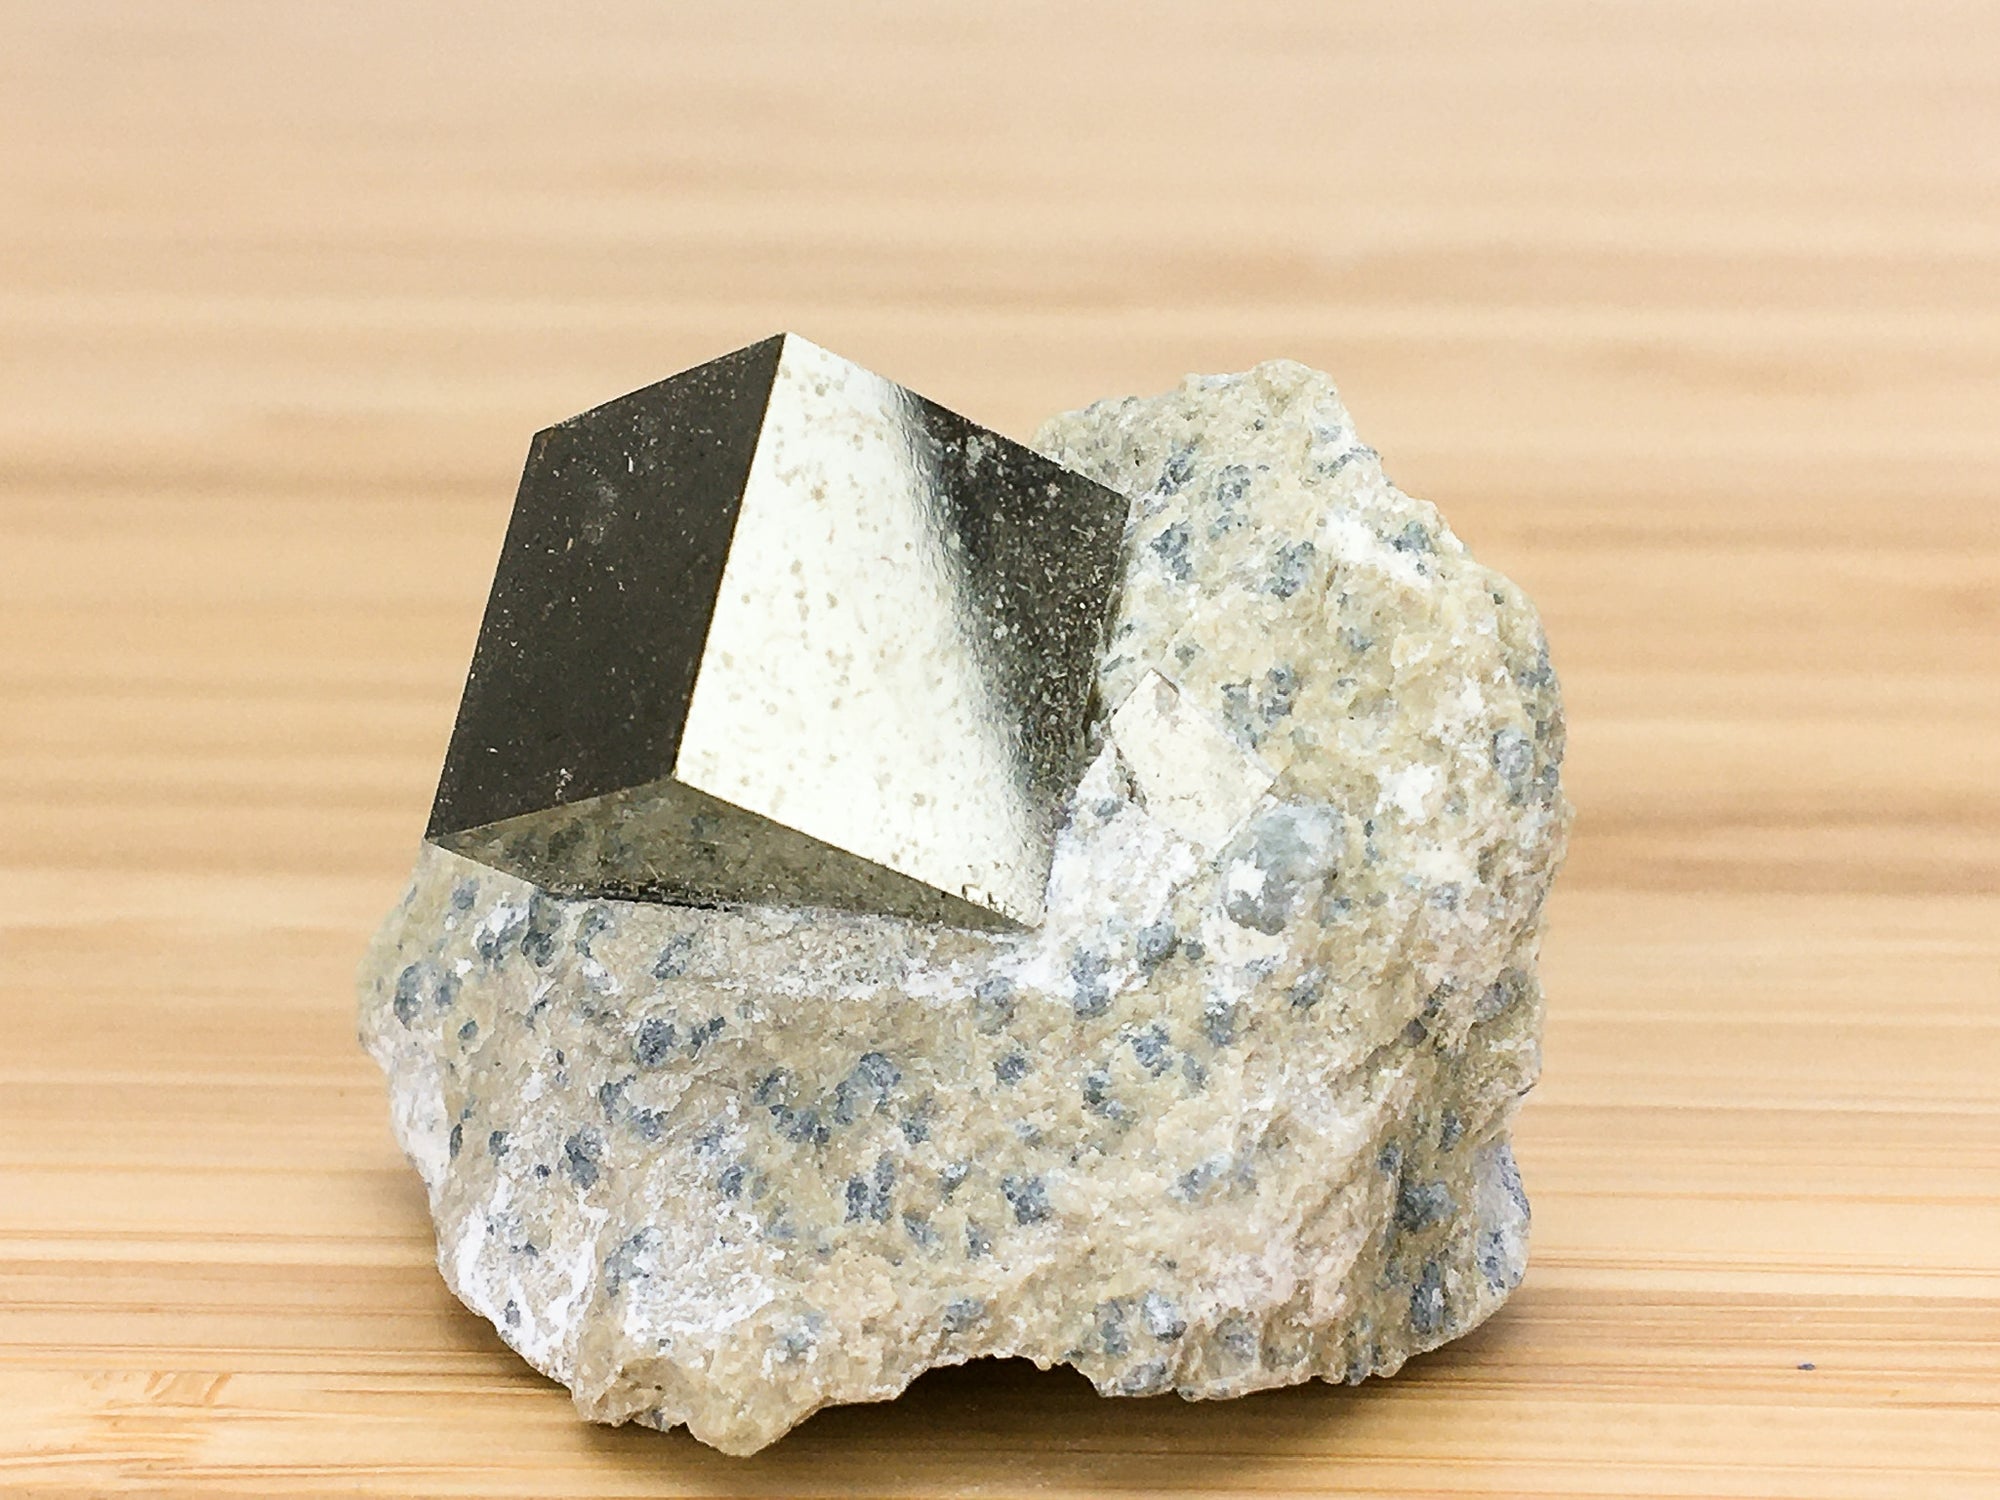 Naturally occurring cubic crystal of iron pyrite in marl matrix